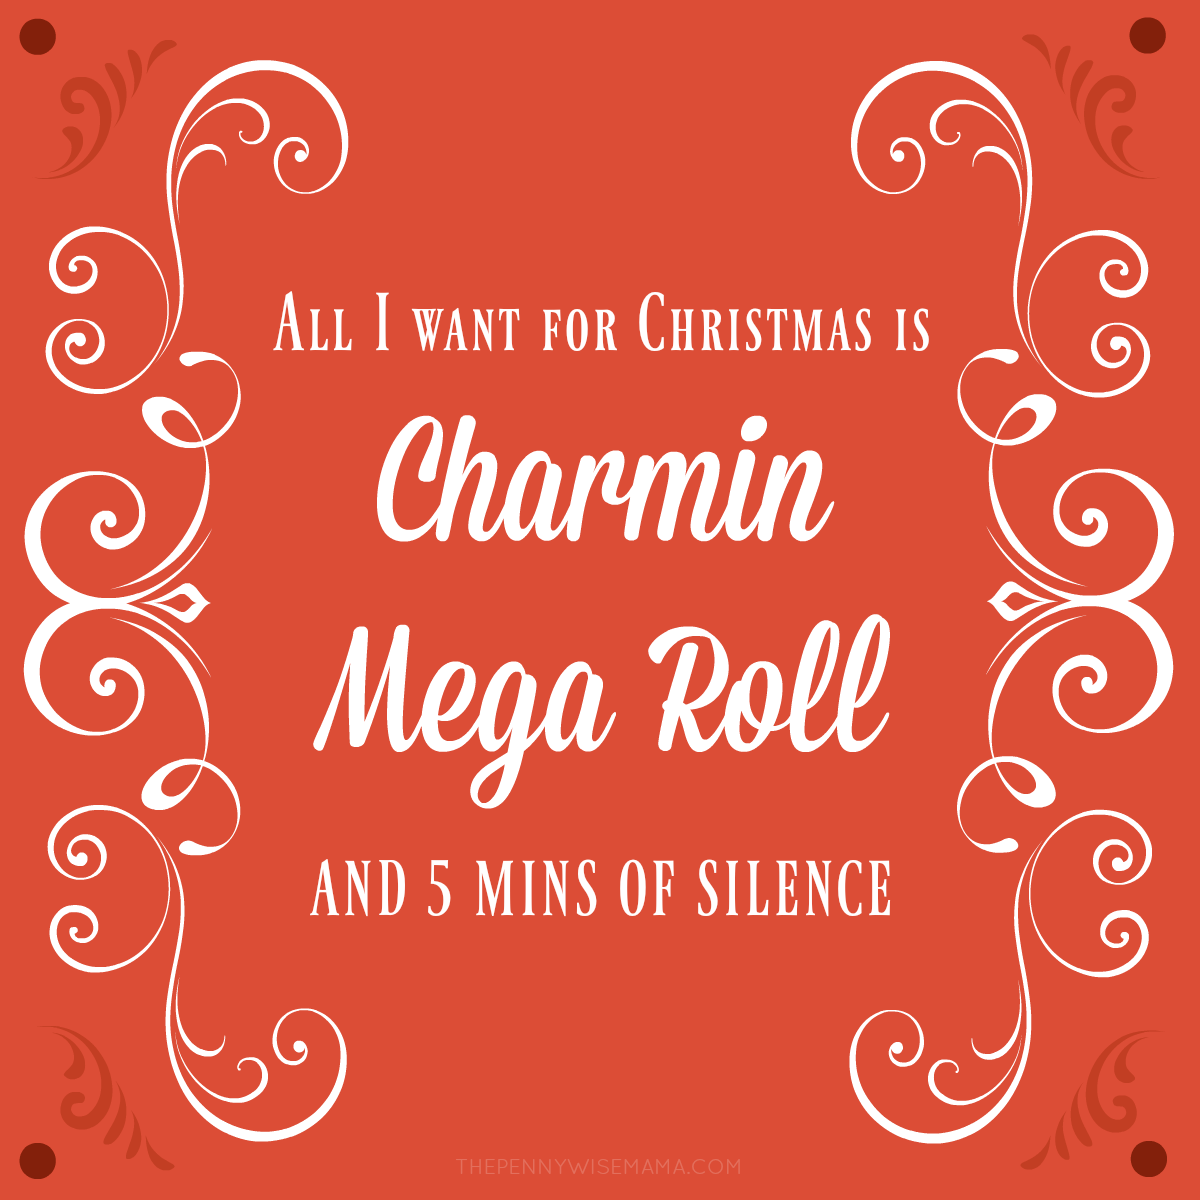 All I Want for Christmas is Charmin Mega Roll and 5 Mins of Silence